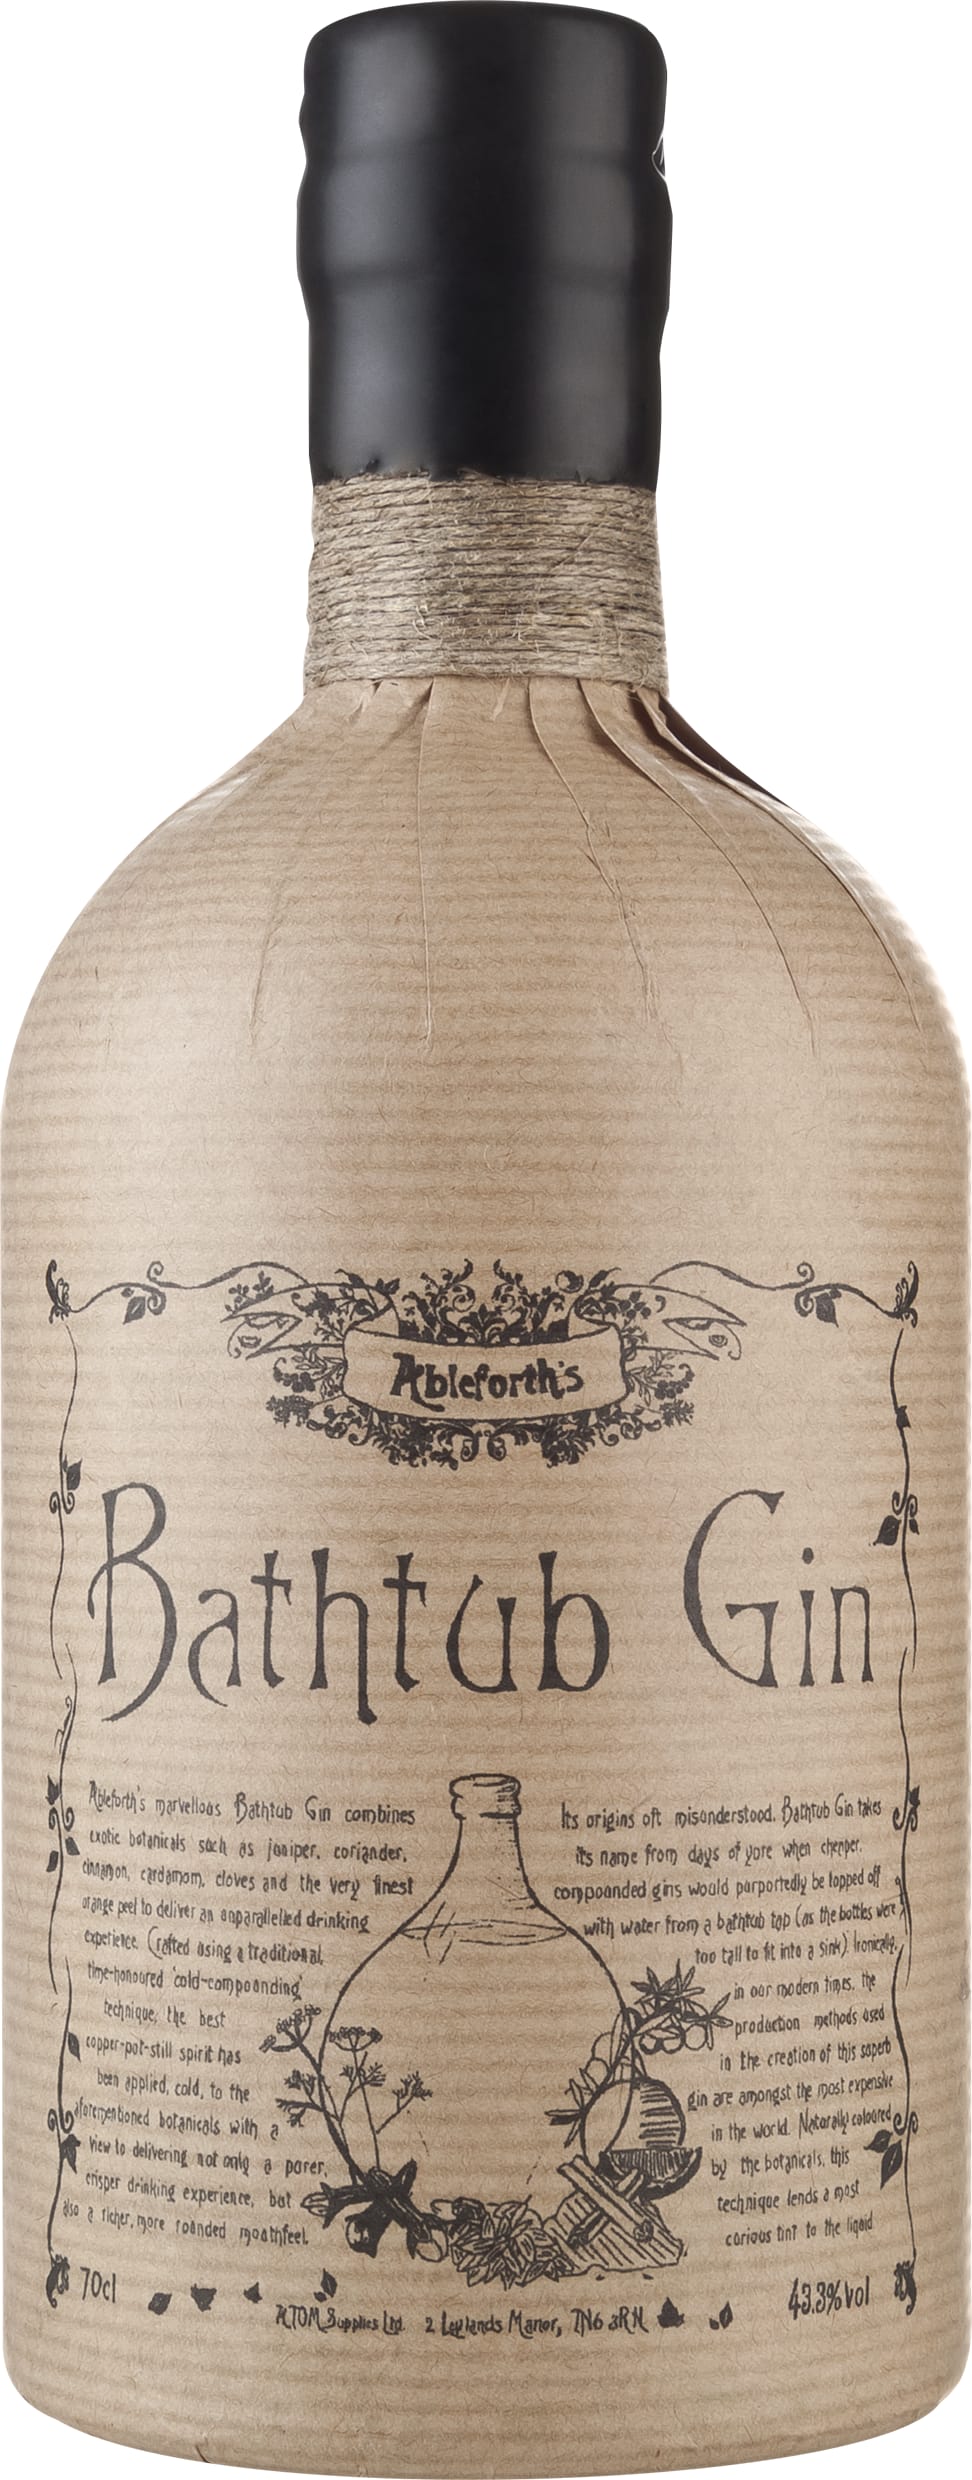 Bathtub Gin 70cl NV - Buy Ableforth's Wines from GREAT WINES DIRECT wine shop